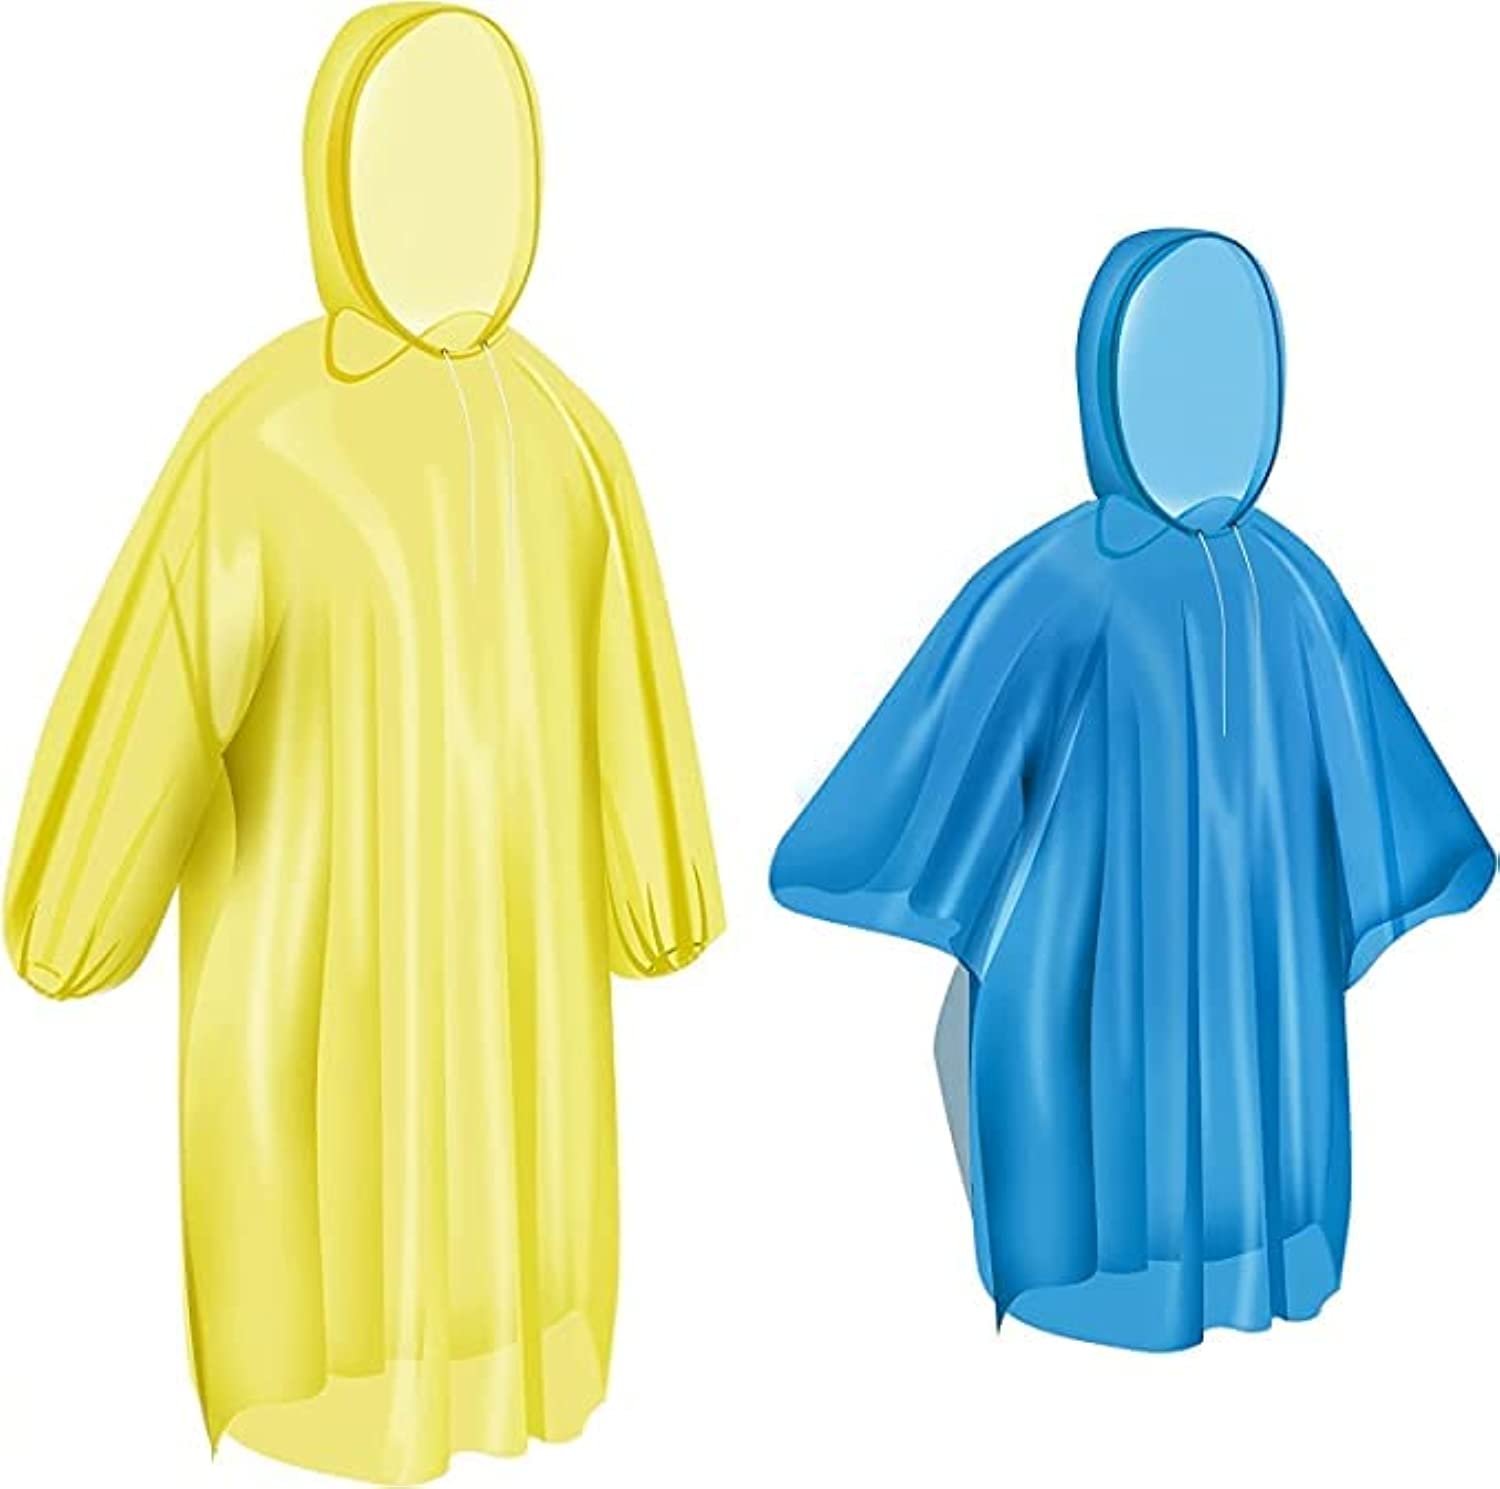 Ponchos Family Pack, Rain Poncho for Adults and Kids (5 Pack, 3 Adults and 2 Kids) Disposable or Reusable Emergency Ponchos丨Rain Ponchos with Drawstring Hood